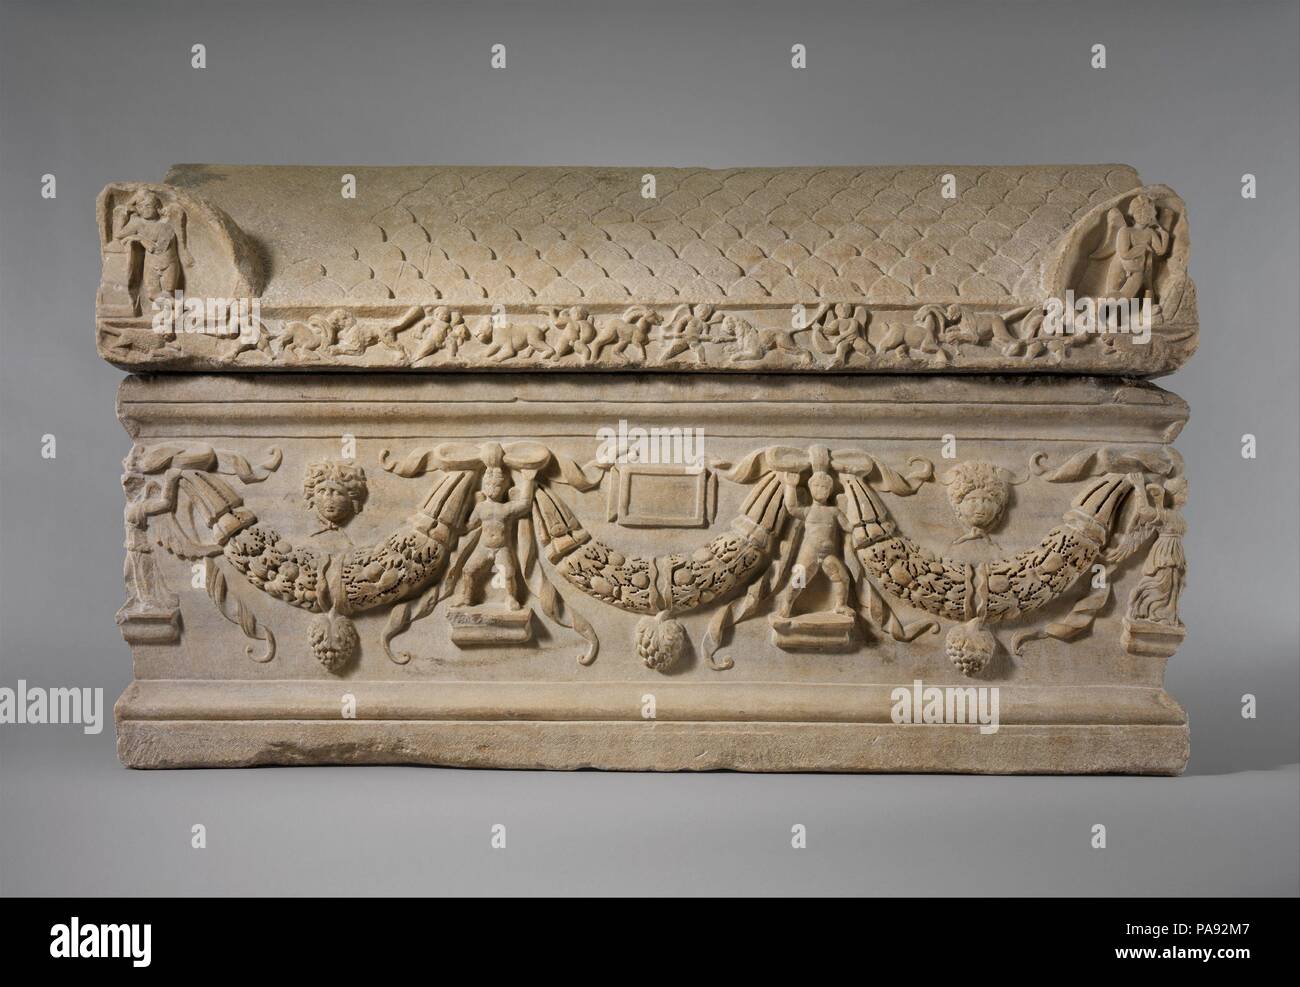 Marble sarcophagus with garlands. Culture: Roman. Dimensions: Overall: 53 x 88in. (134.6 x 223.5cm). Date: ca. A.D. 200-225.  This was the first gift accepted by the Museum.  The back and cover of this sarcophagus are unfinished, and its inscription tablet is blank, which may imply that it went unsold in antiquity. Garlands of oak leaves supported by two erotes and four Victories adorn the front and sides. Medusa heads fill the spaces above the garlands, except in the center of the front, where there is the blank inscription tablet. Six erotes hunt various wild animals along the front face of  Stock Photo